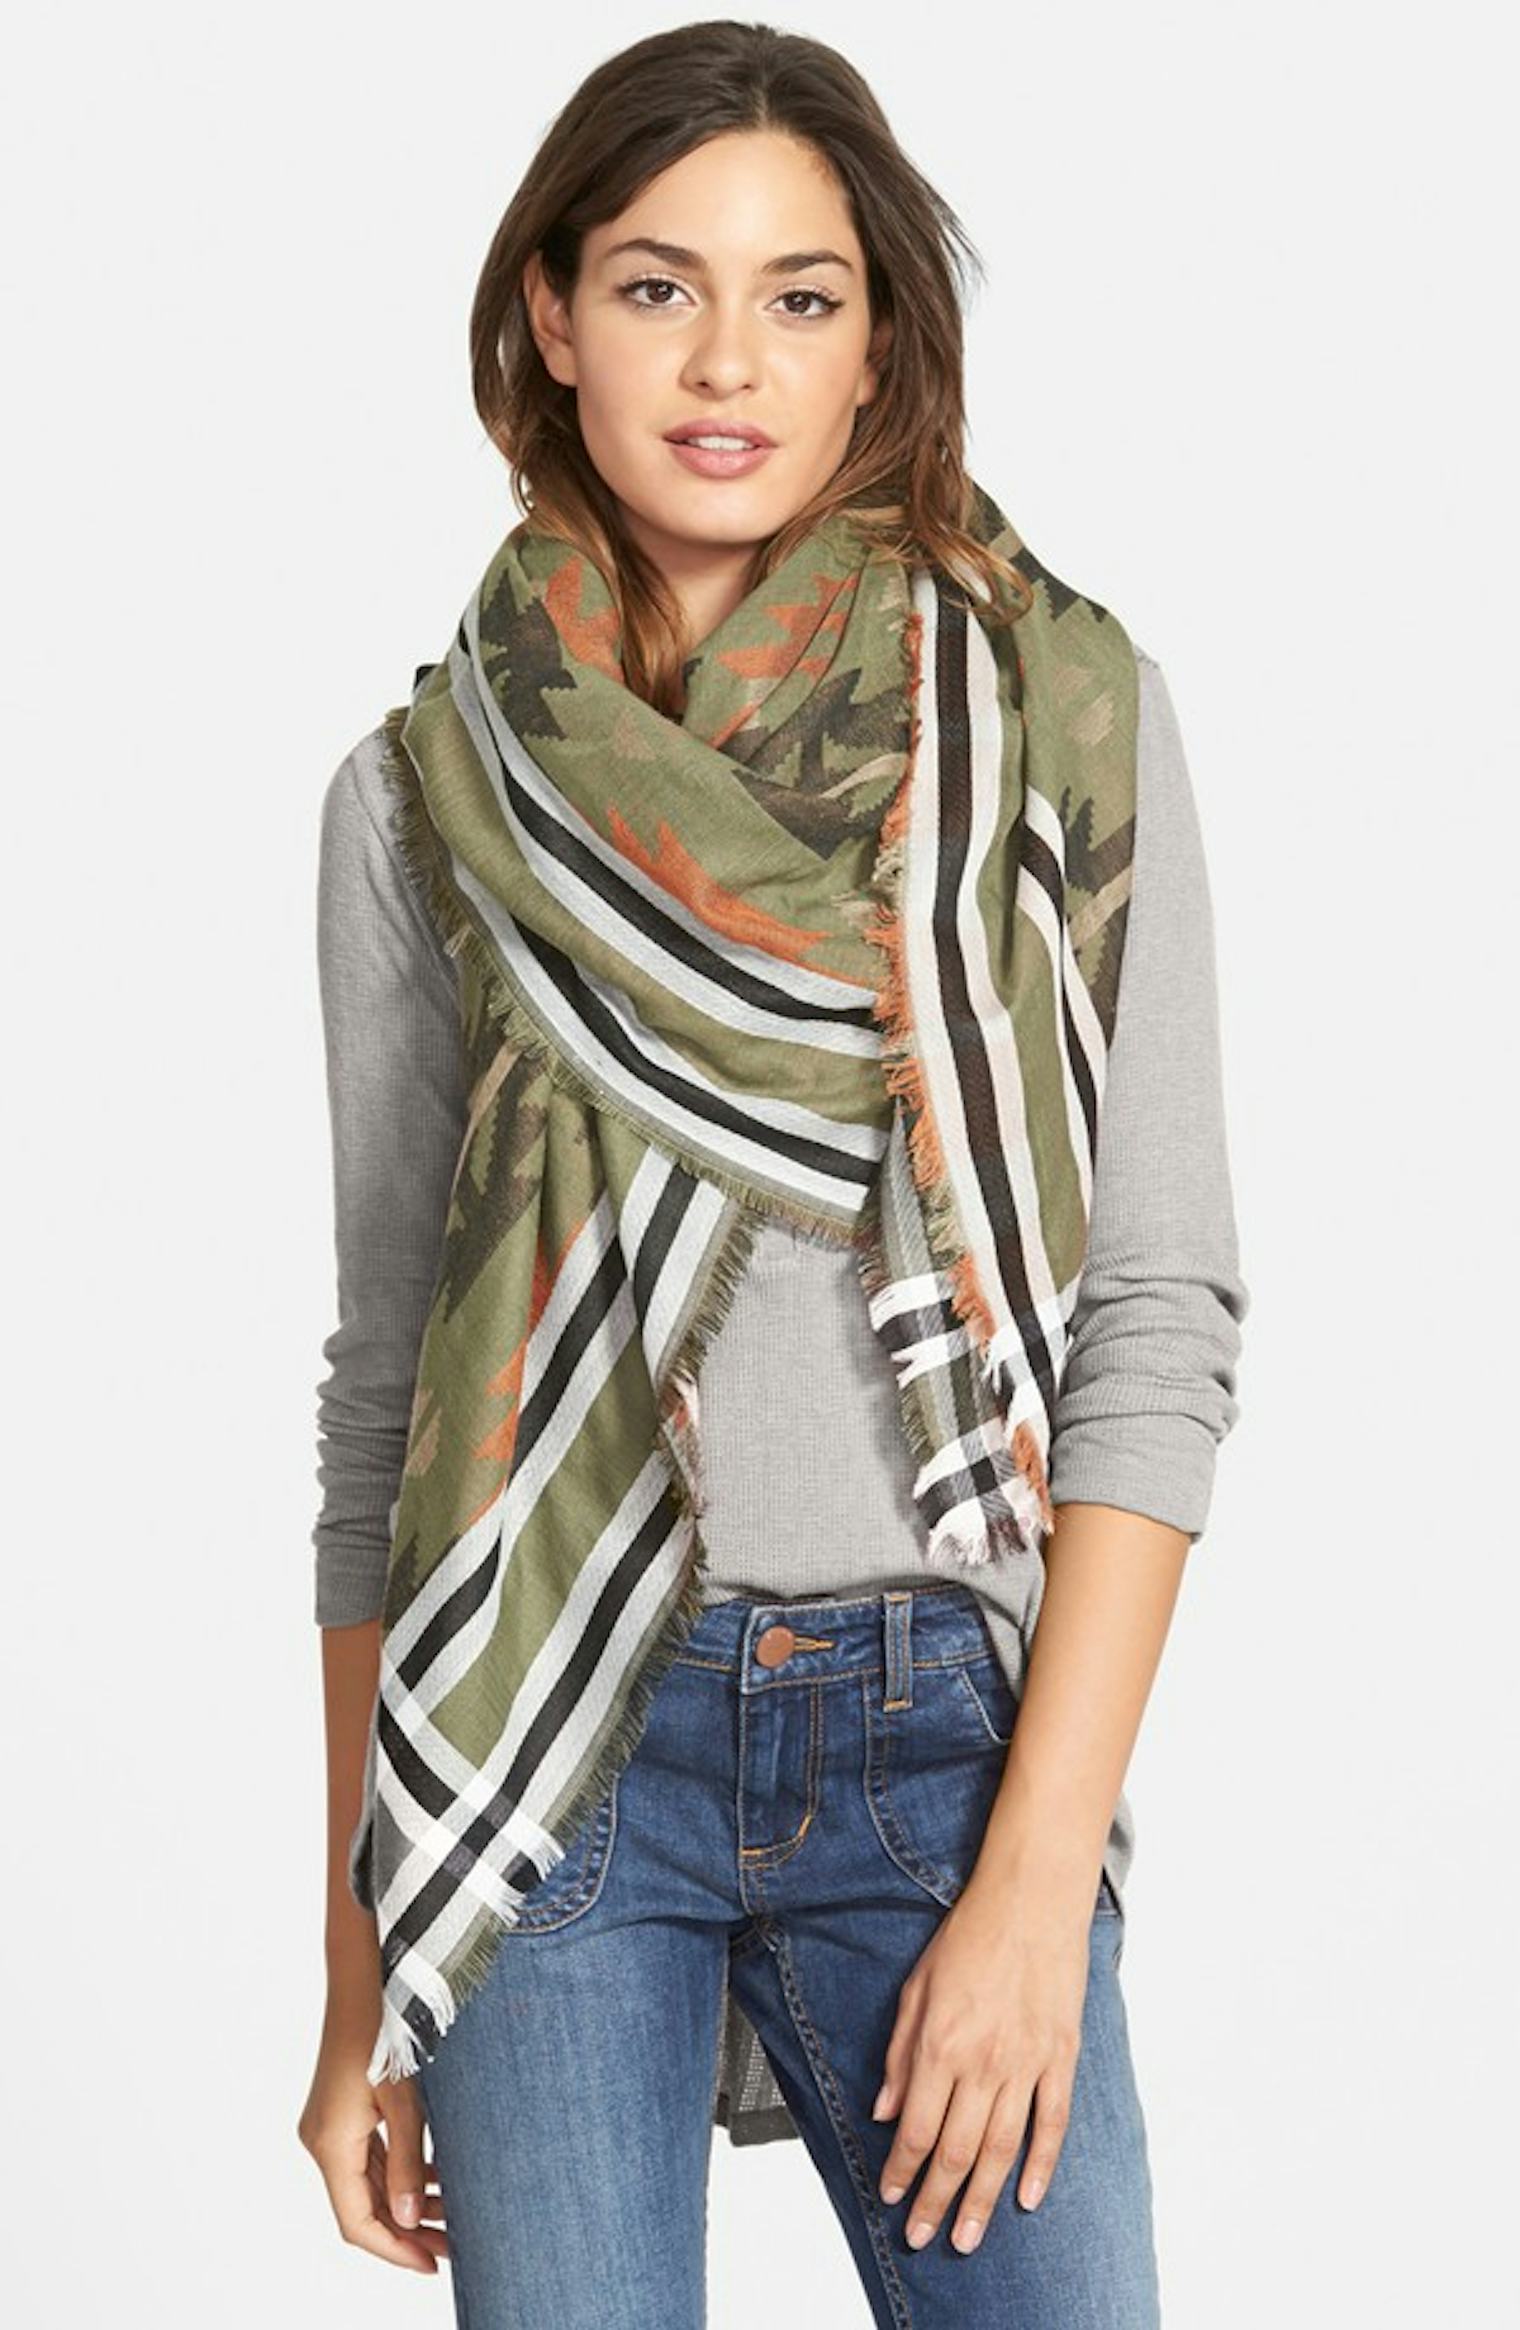 How Often Should You Wash Your Scarf To Keep It Clean Through Winter?